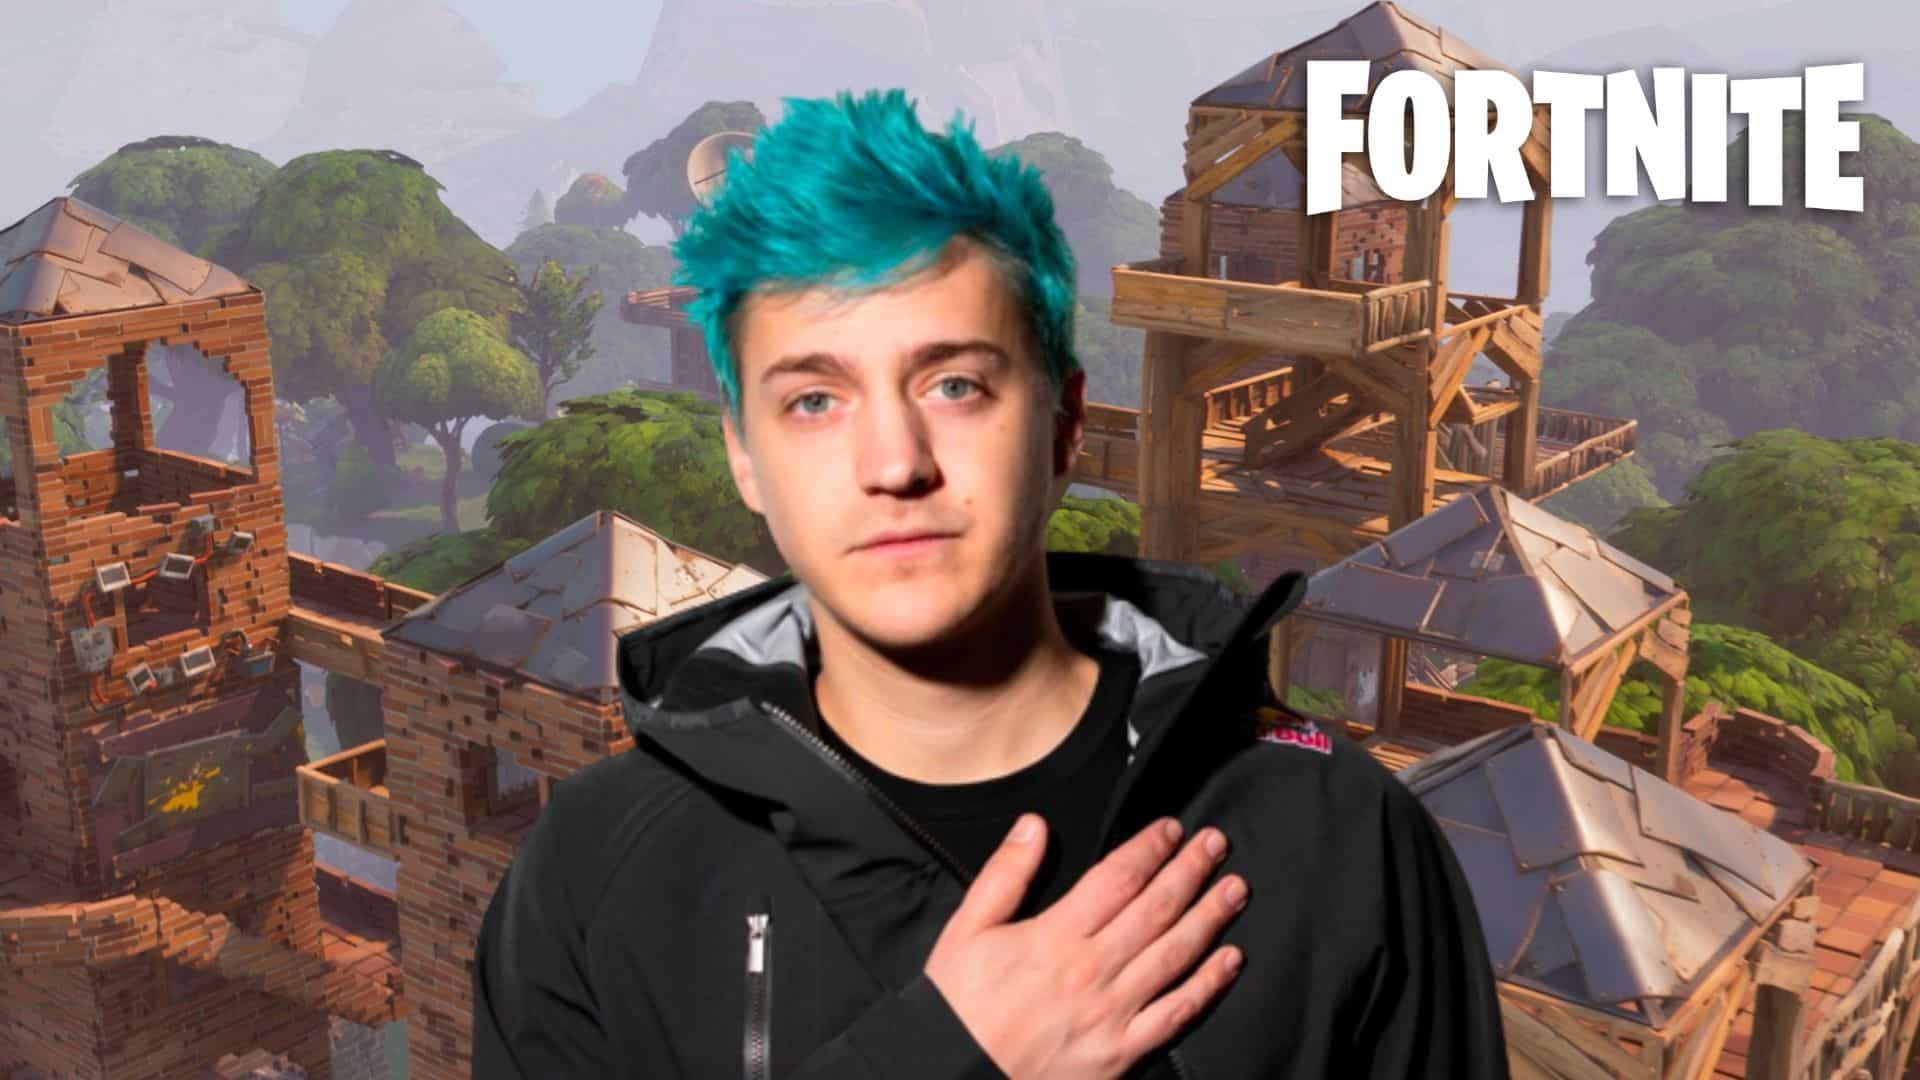 Ninja in Red Bull jacket with Fortnite building in background